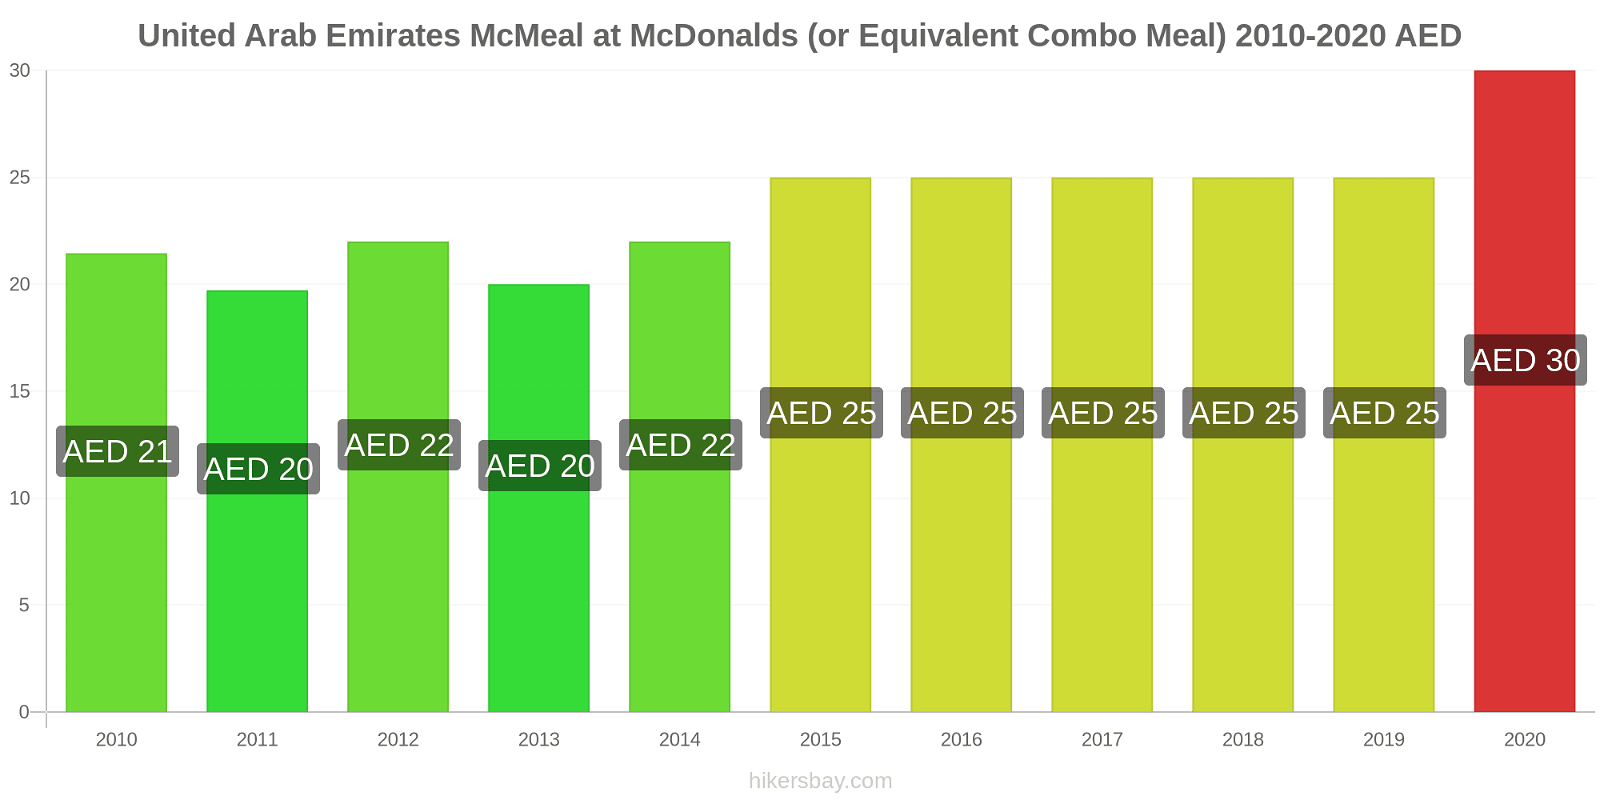 United Arab Emirates price changes McMeal at McDonalds (or Equivalent Combo Meal) hikersbay.com